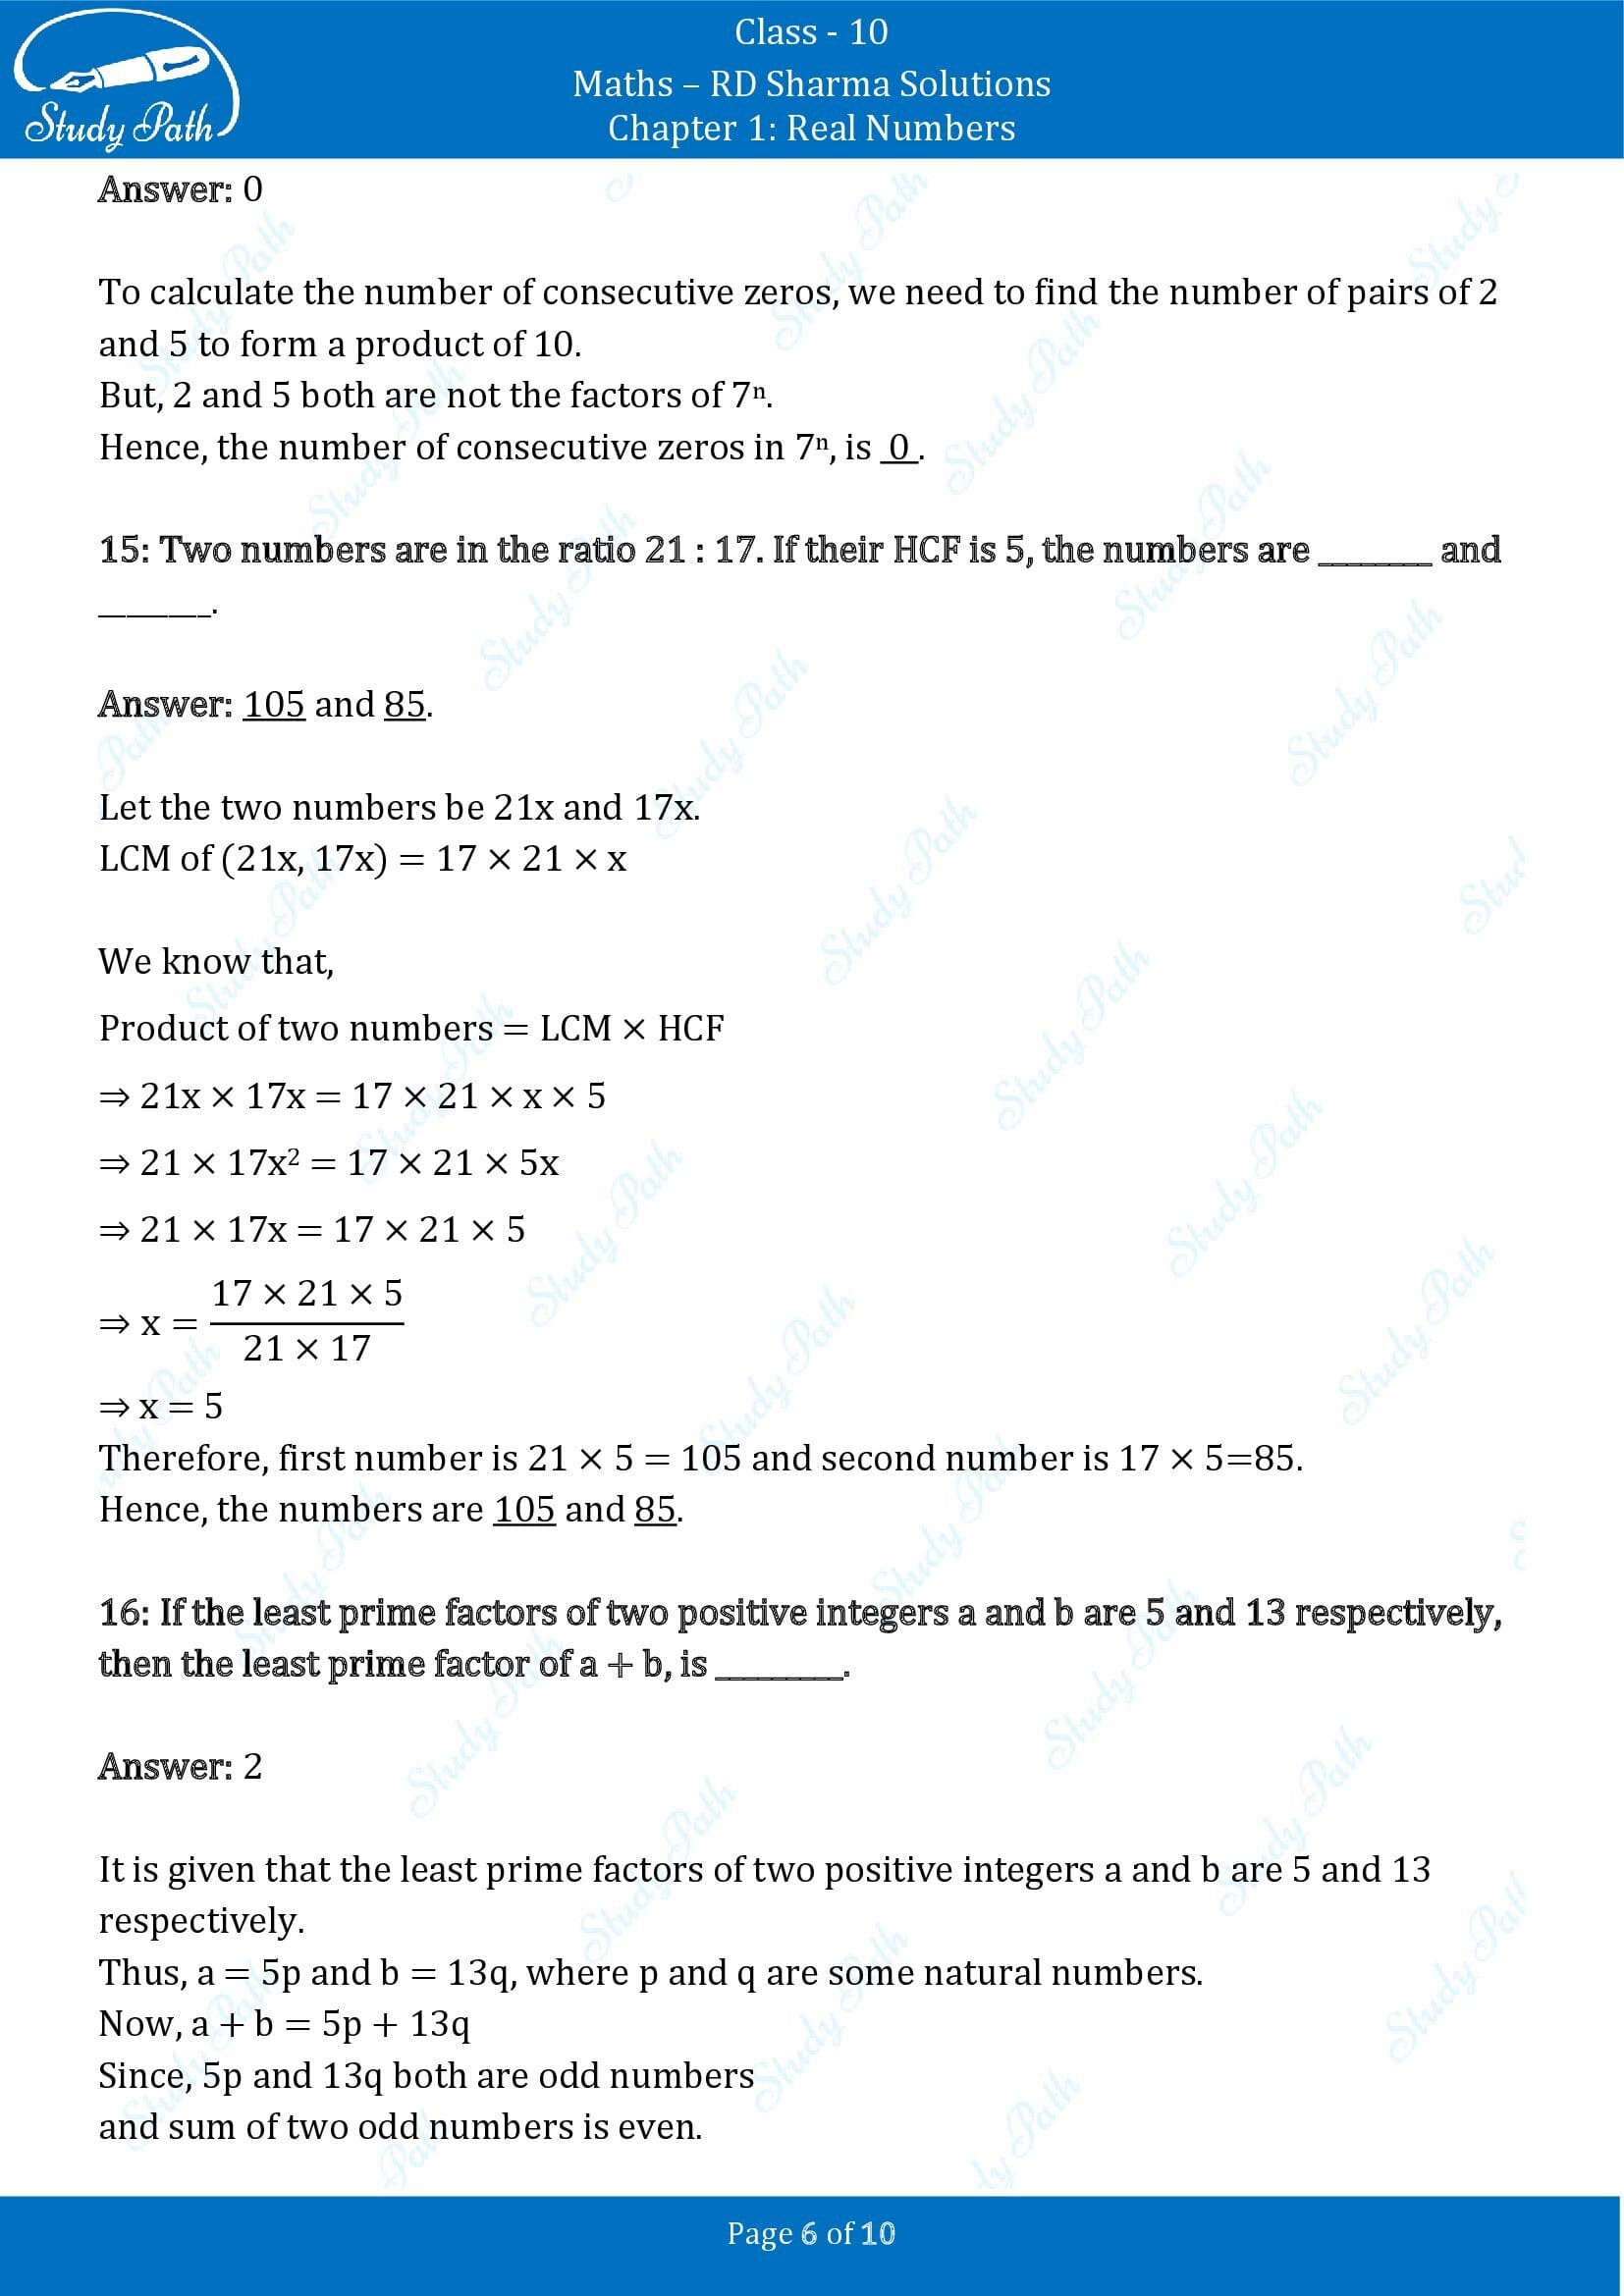 RD Sharma Solutions Class 10 Chapter 1 Real Numbers Fill in the Blank Type Questions FBQs 00006